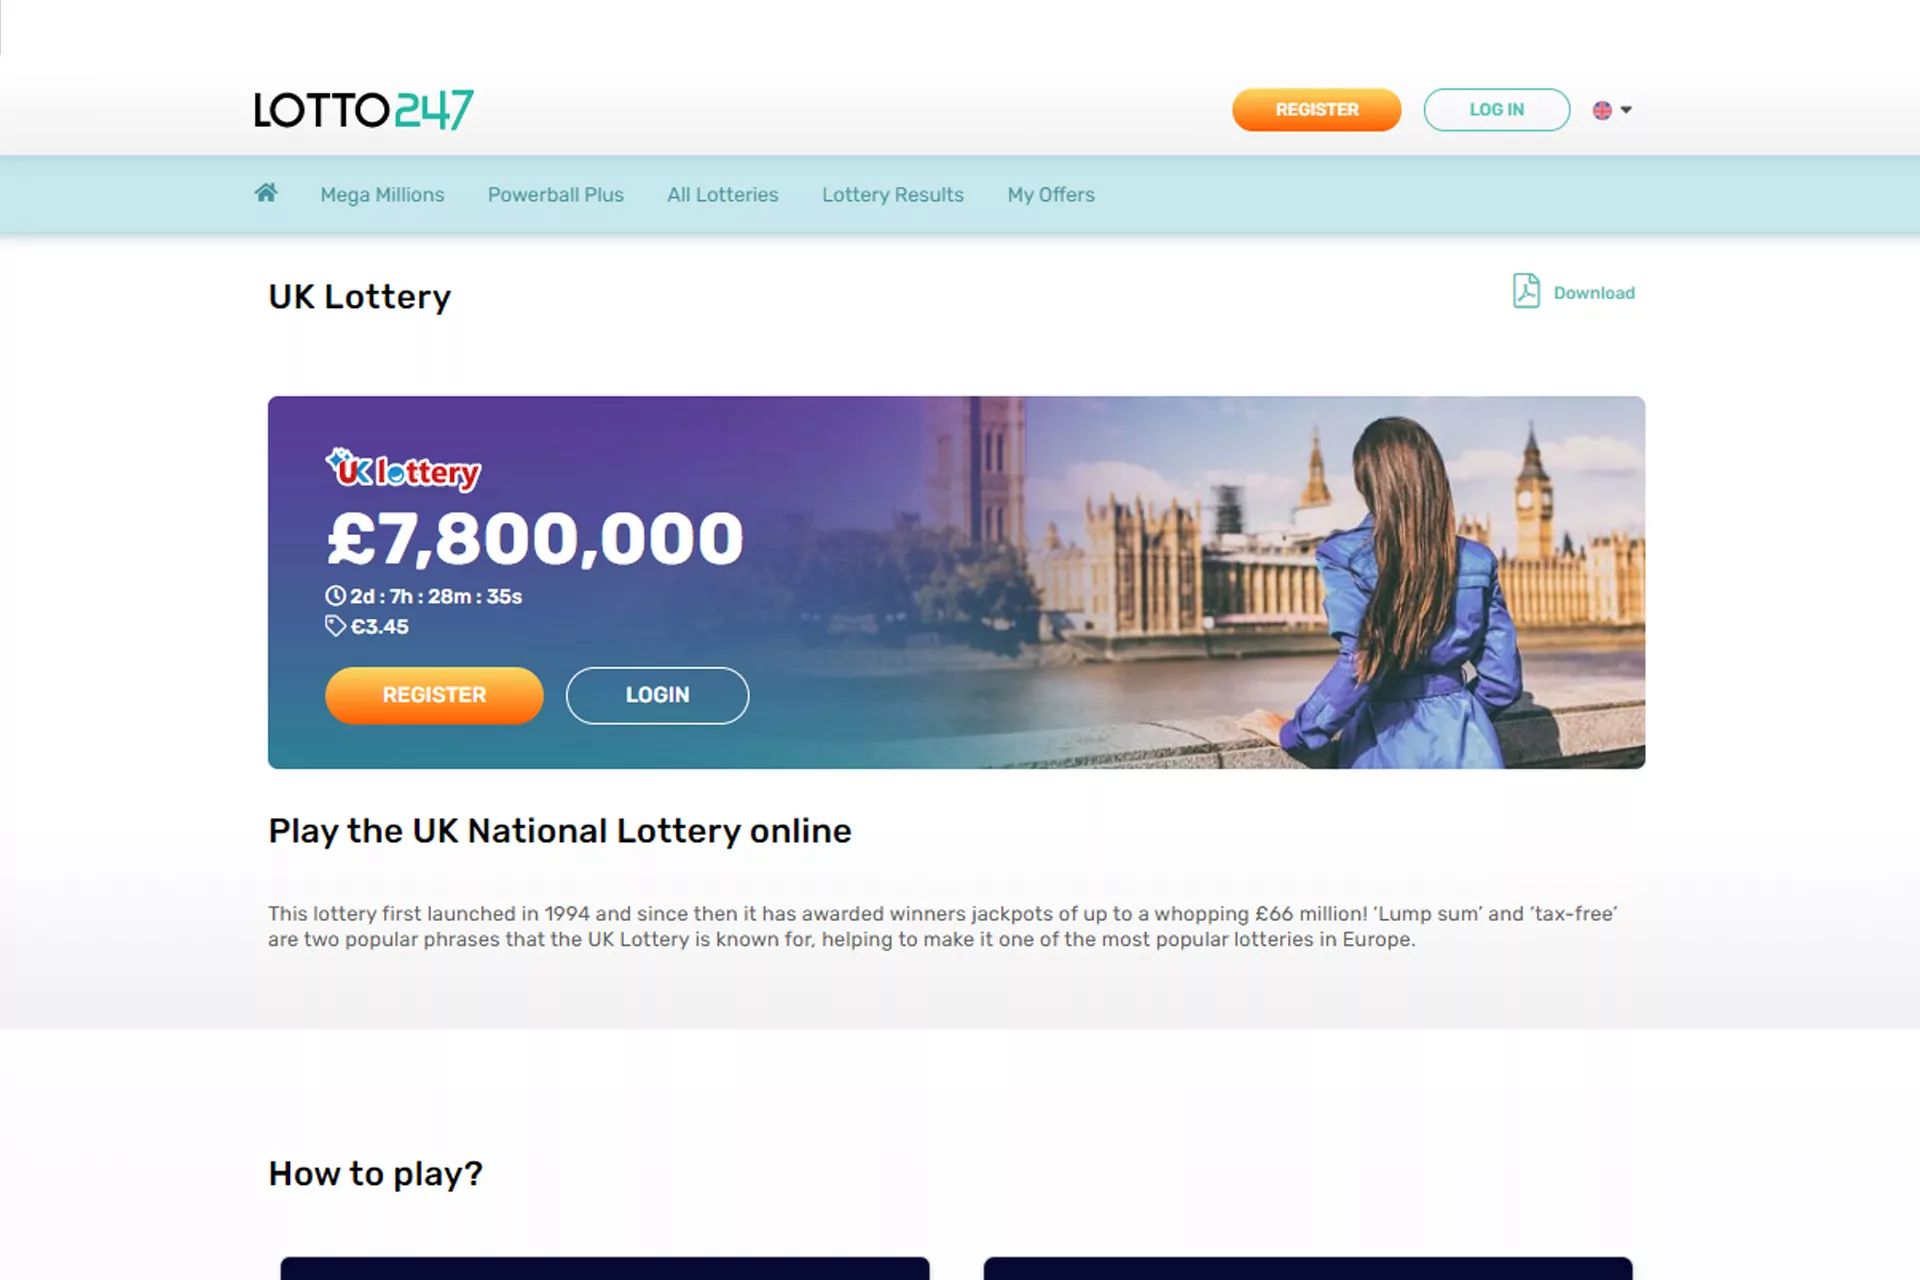 The entire award is paid out instantly for UK Lottery winners.